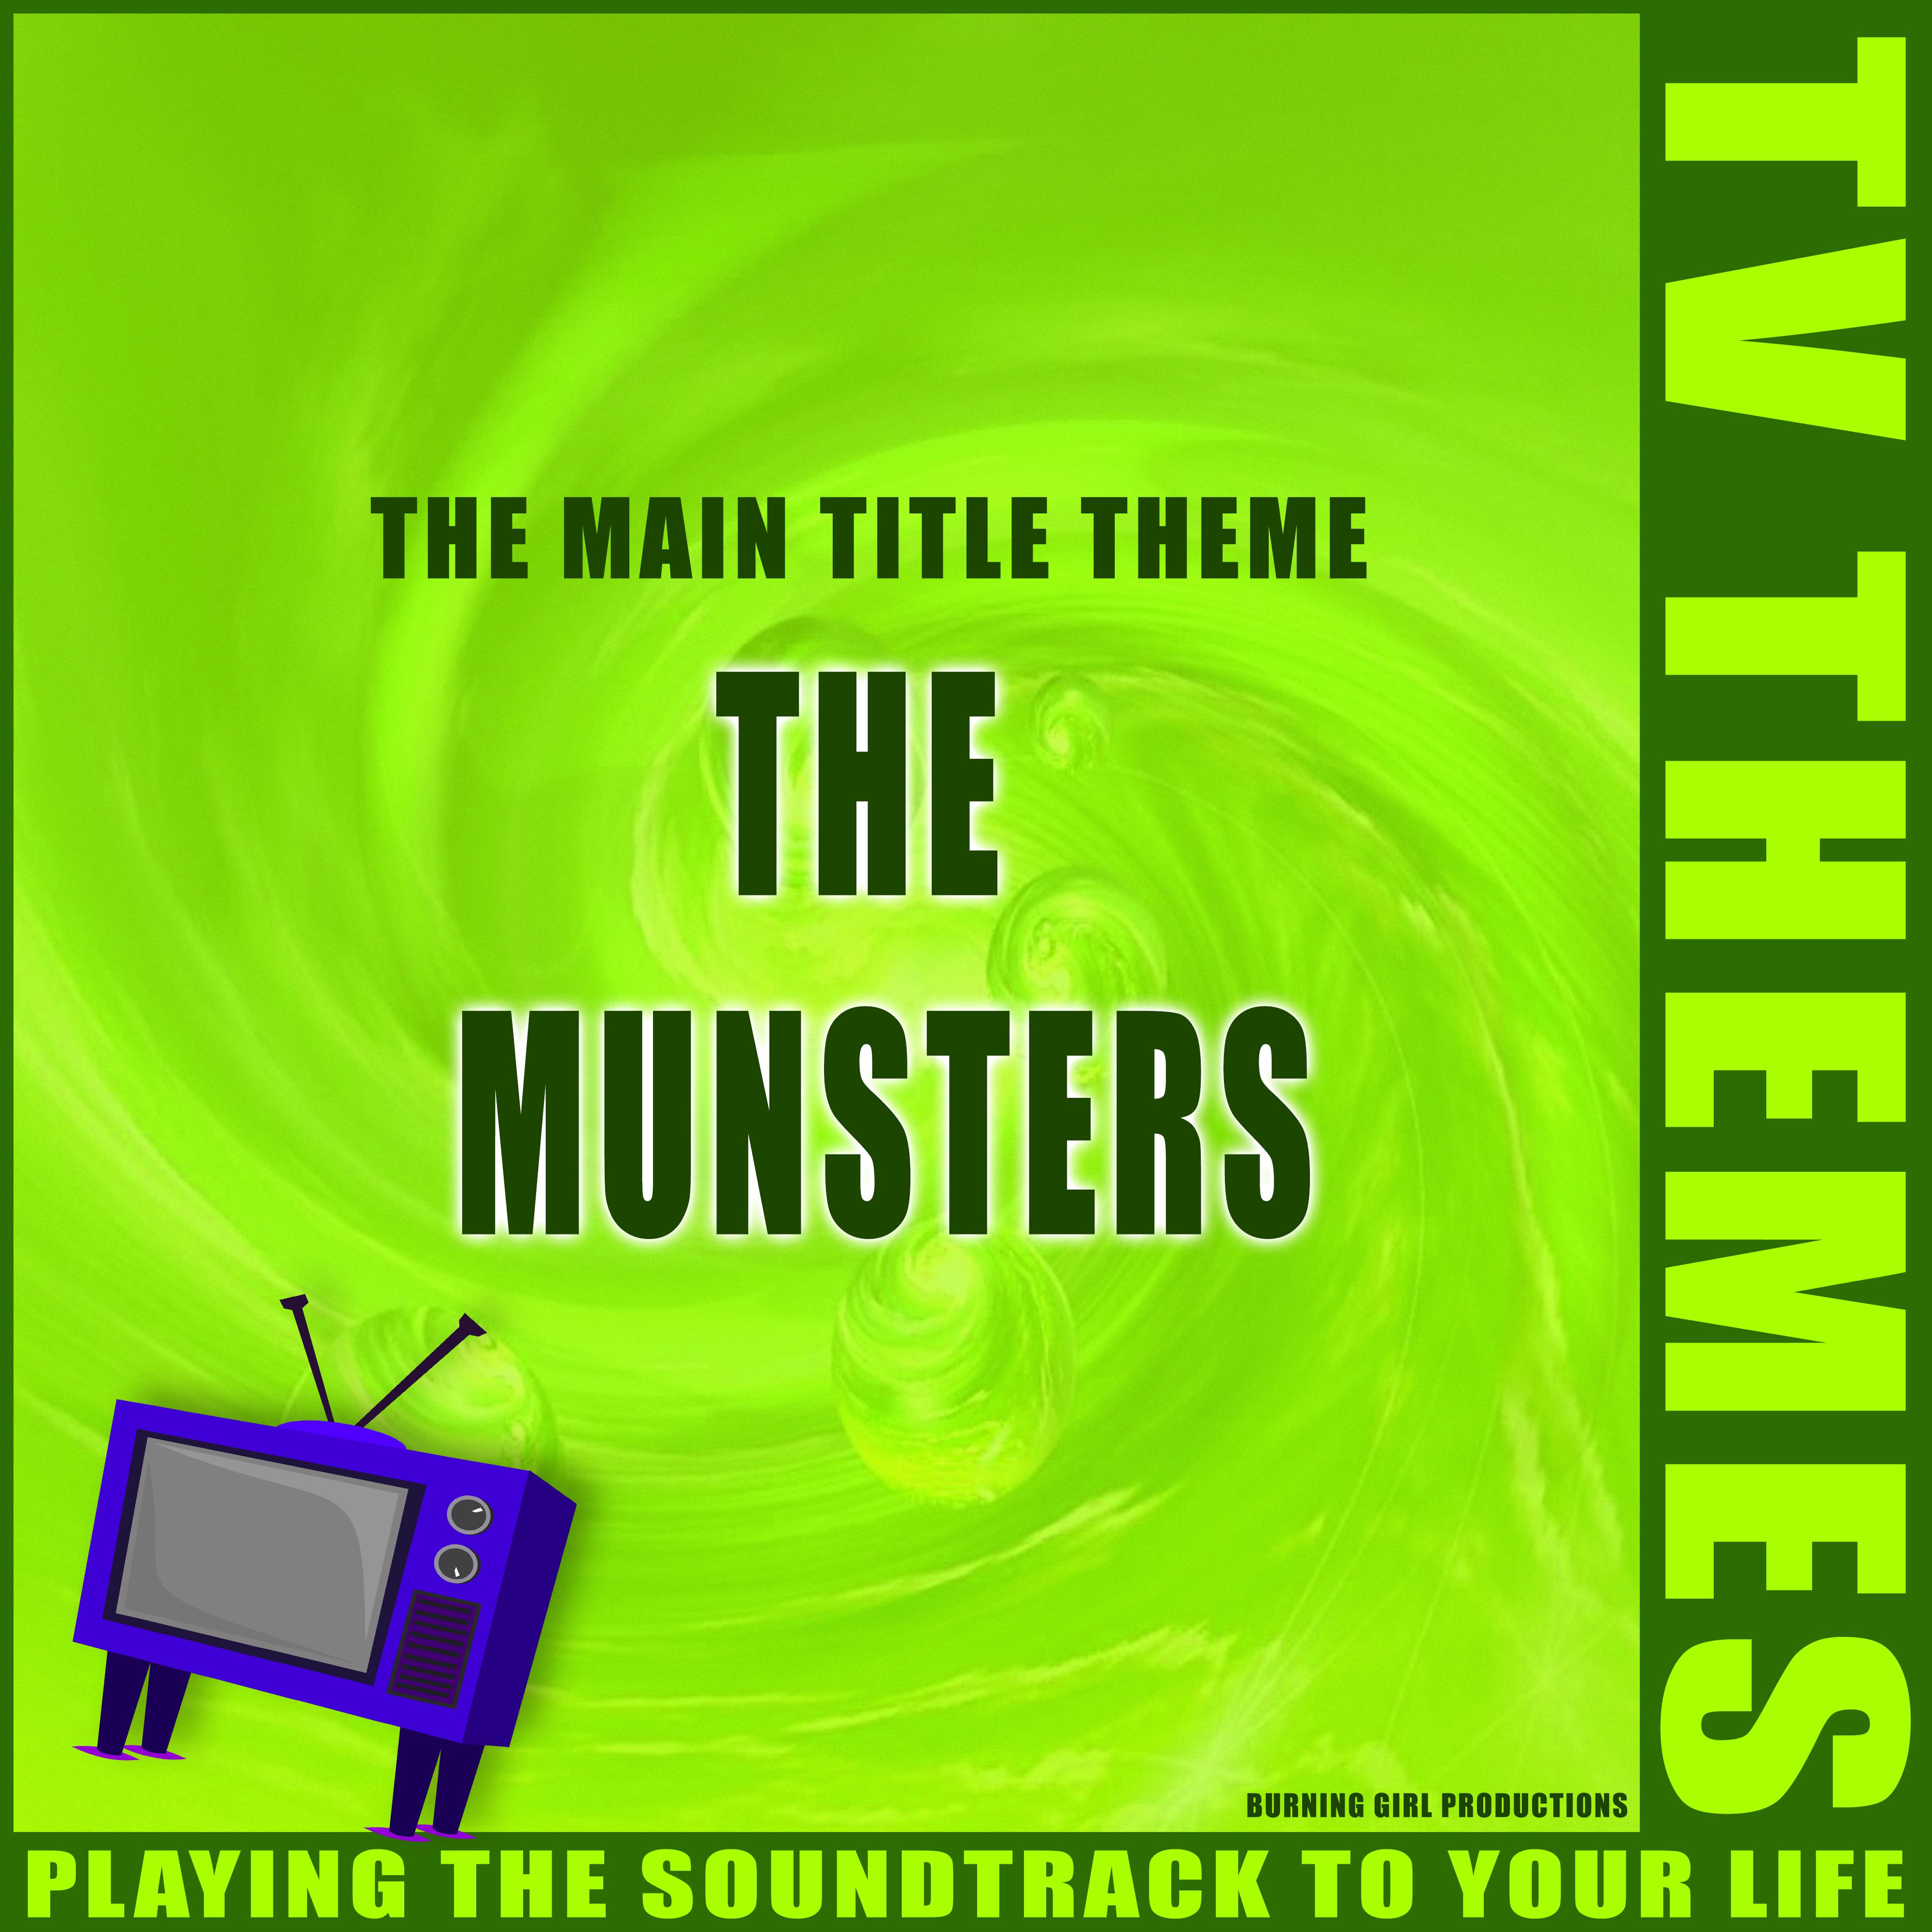 The Main Title Theme - The Munsters